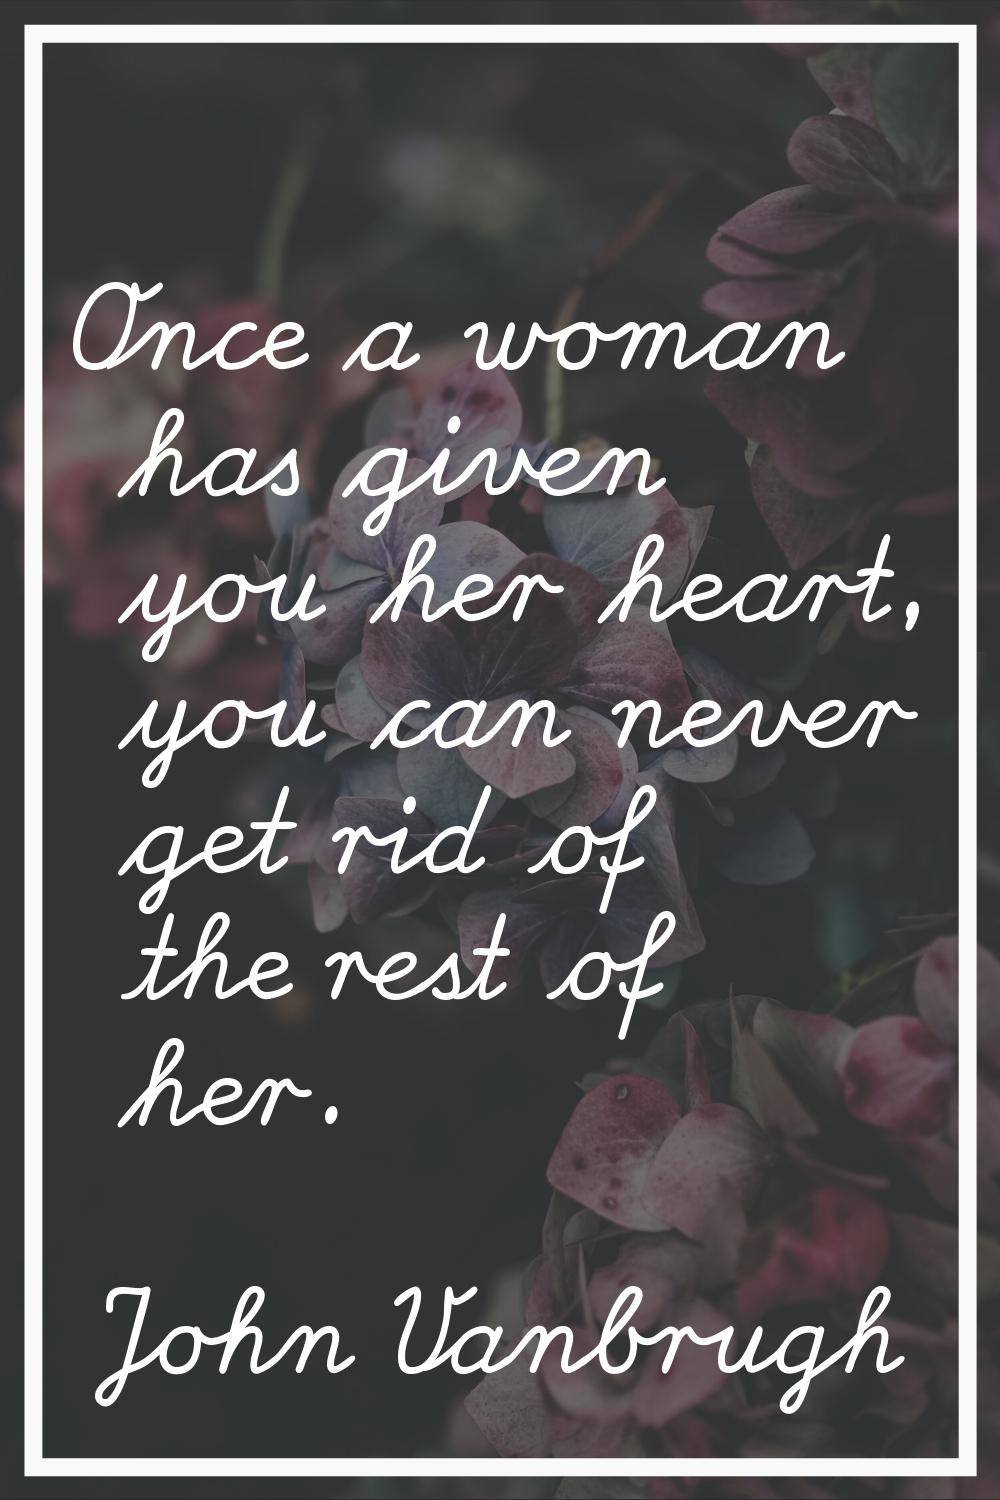 Once a woman has given you her heart, you can never get rid of the rest of her.